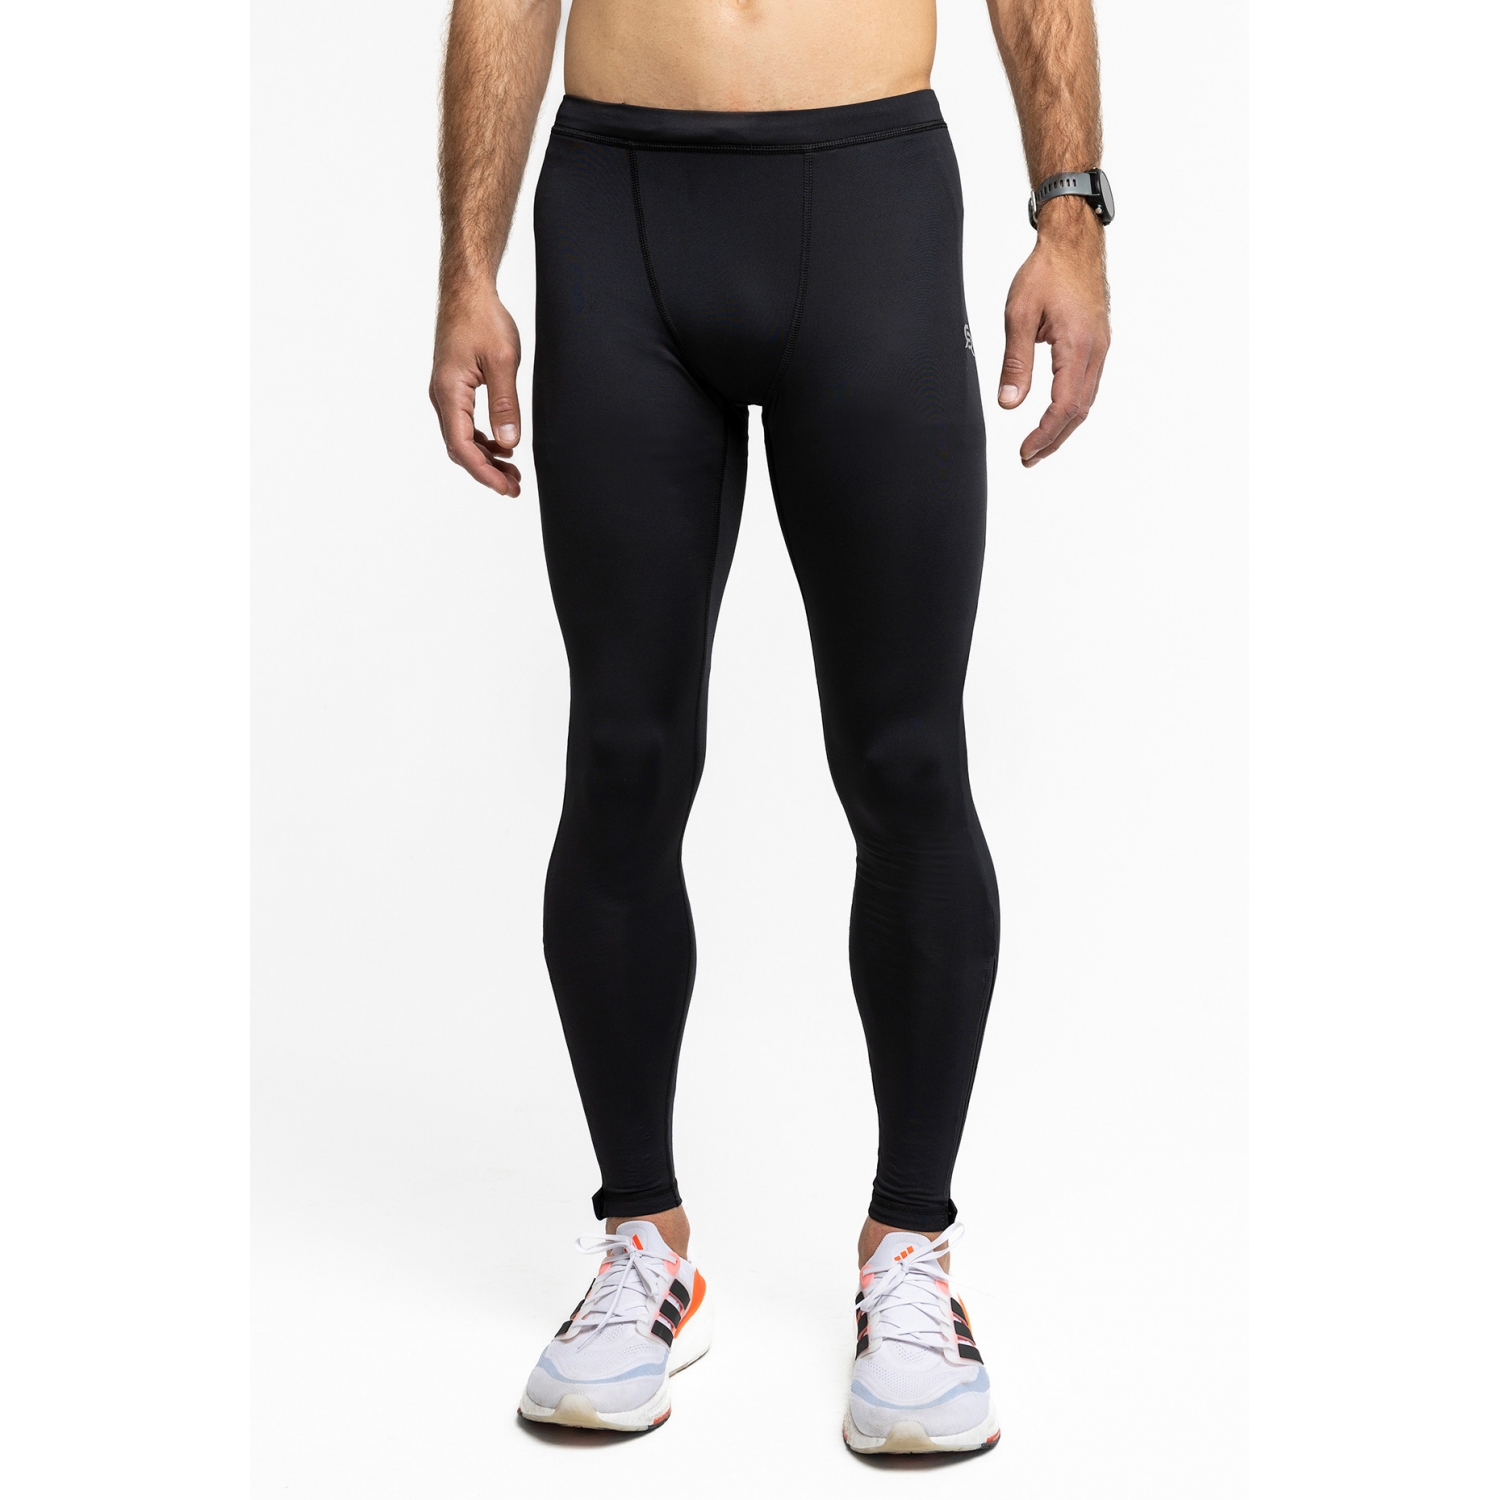 https://roughradical.com.pl/9172-full_product/men-s-pro-performance-tights-running-trousers.jpg